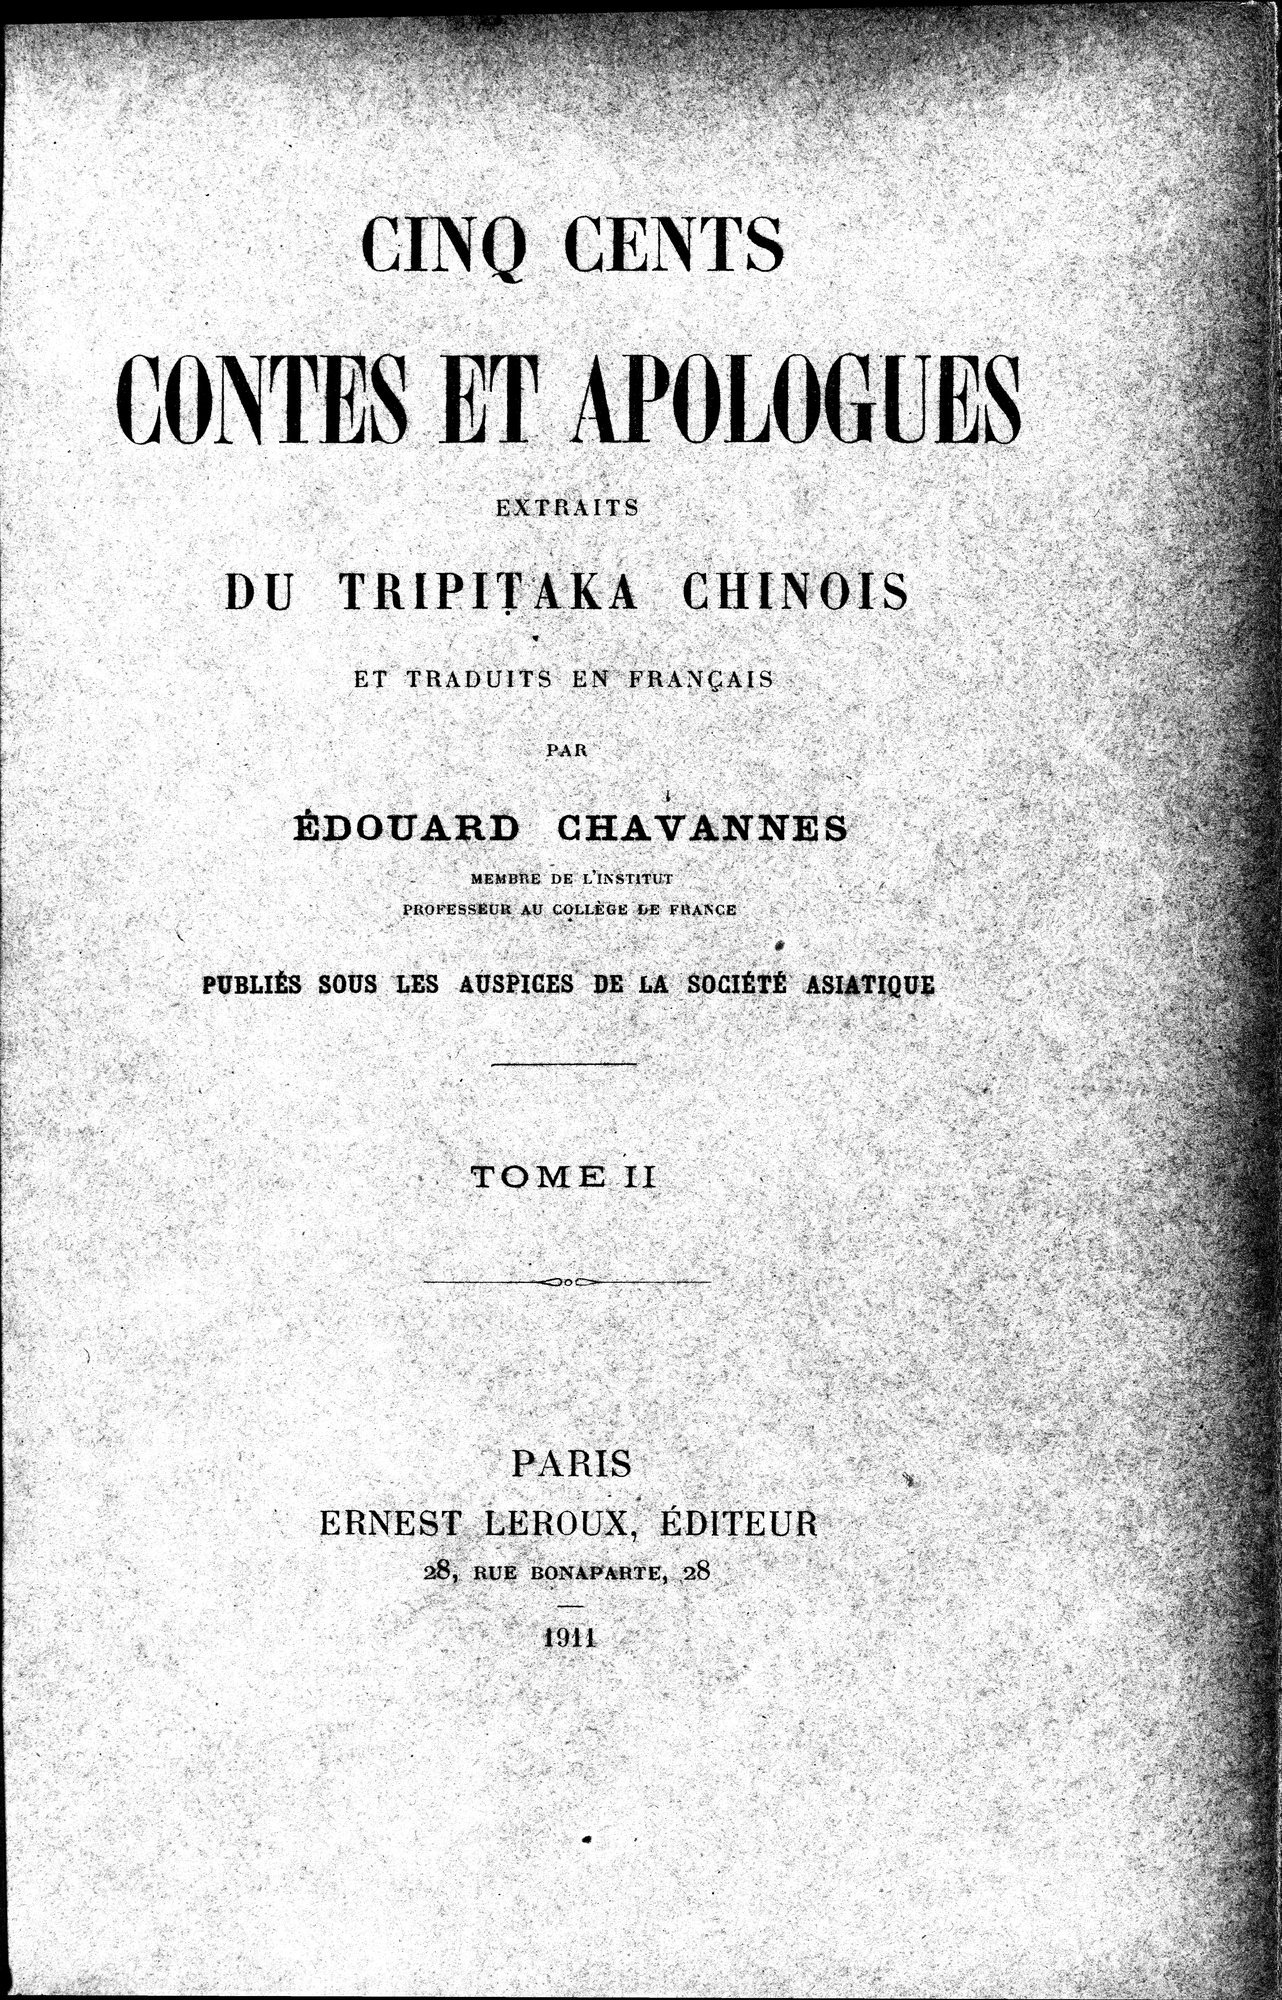 Cinq Cents Contes et Apologues : vol.2 / Page 7 (Grayscale High Resolution Image)